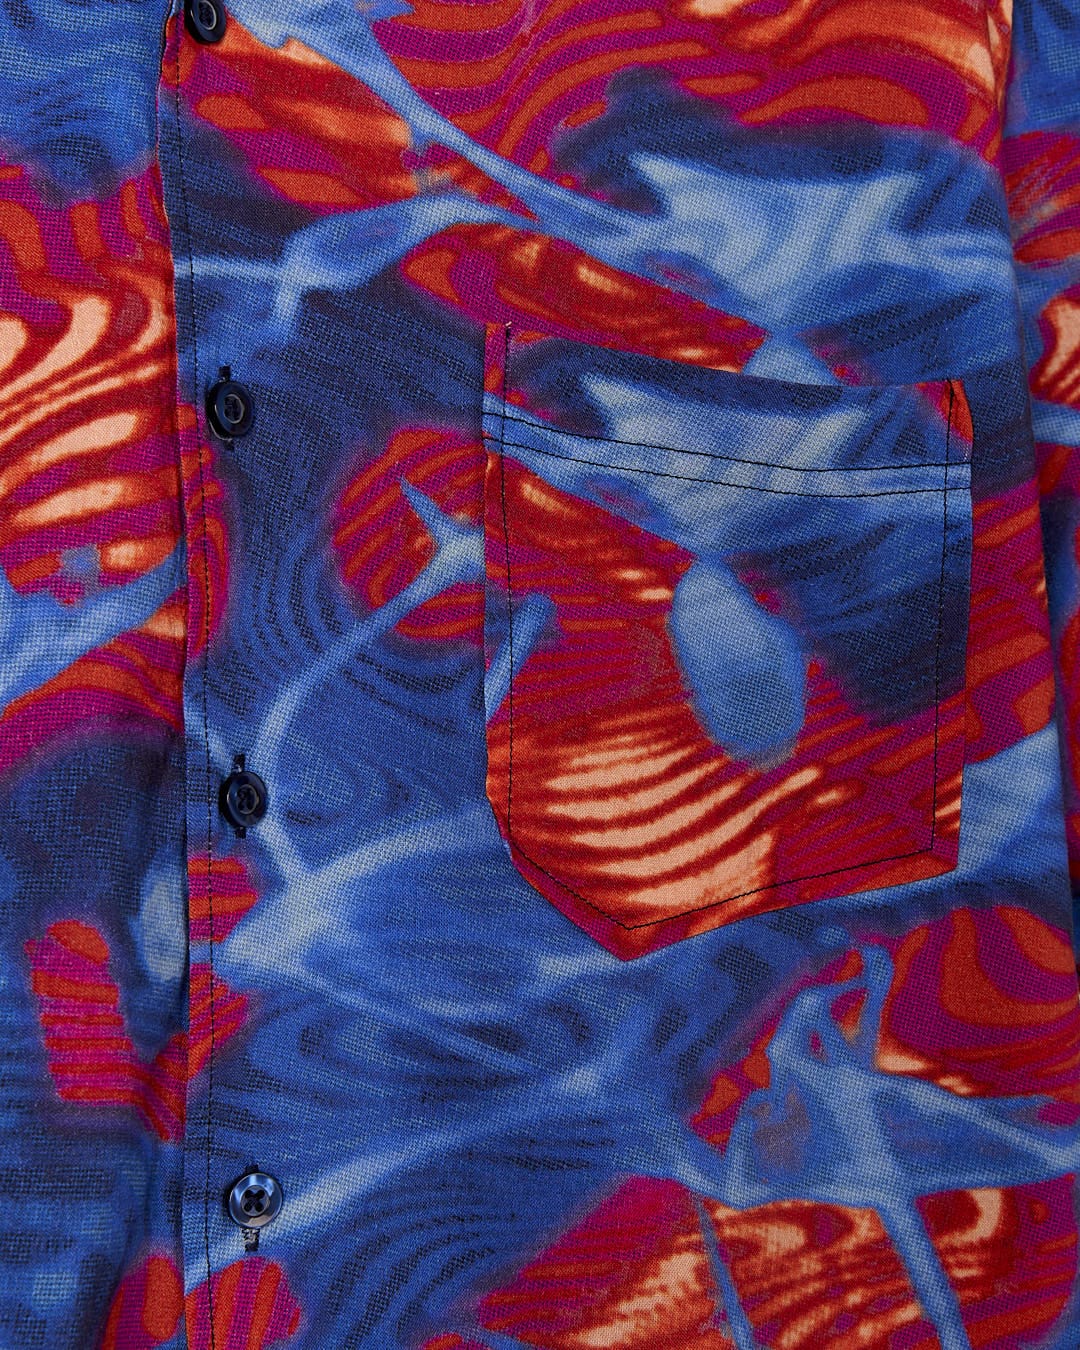 This Saltrock - Poolside Mens Short Sleeve Shirt has a bright and fun style, featuring a red, blue and orange pattern.